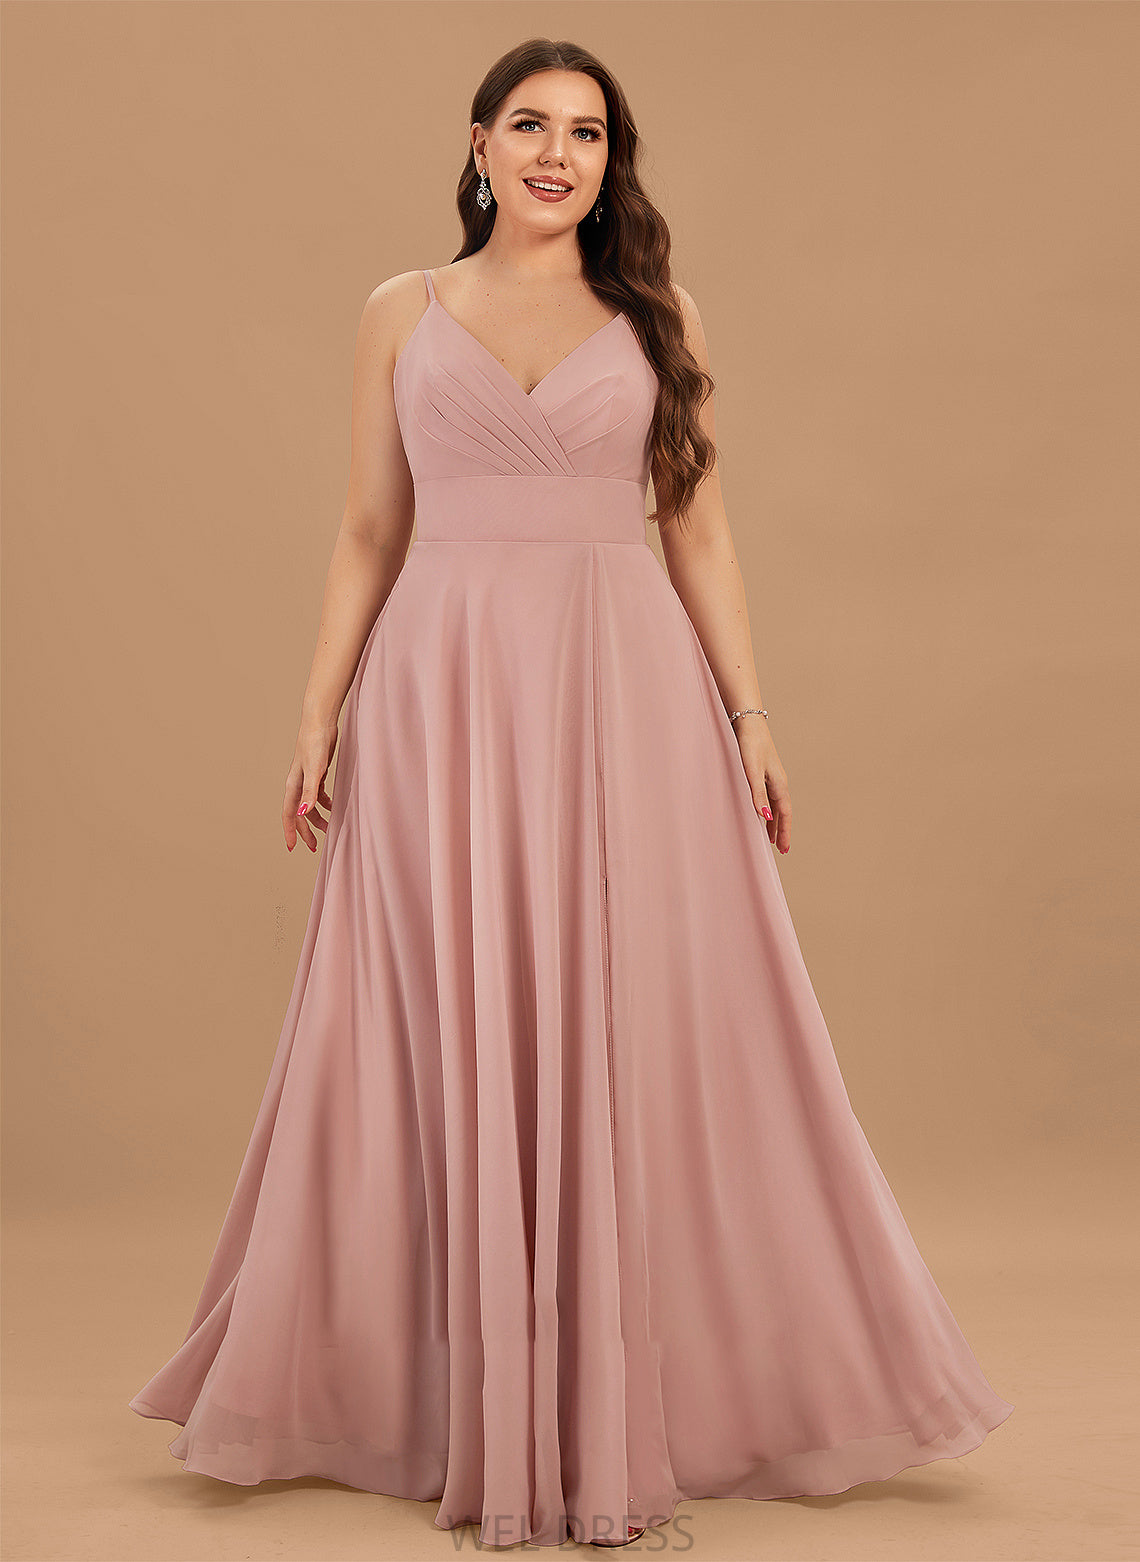 Ruffle Pockets A-Line Prom Dresses Floor-Length Chiffon V-neck Kayleigh With